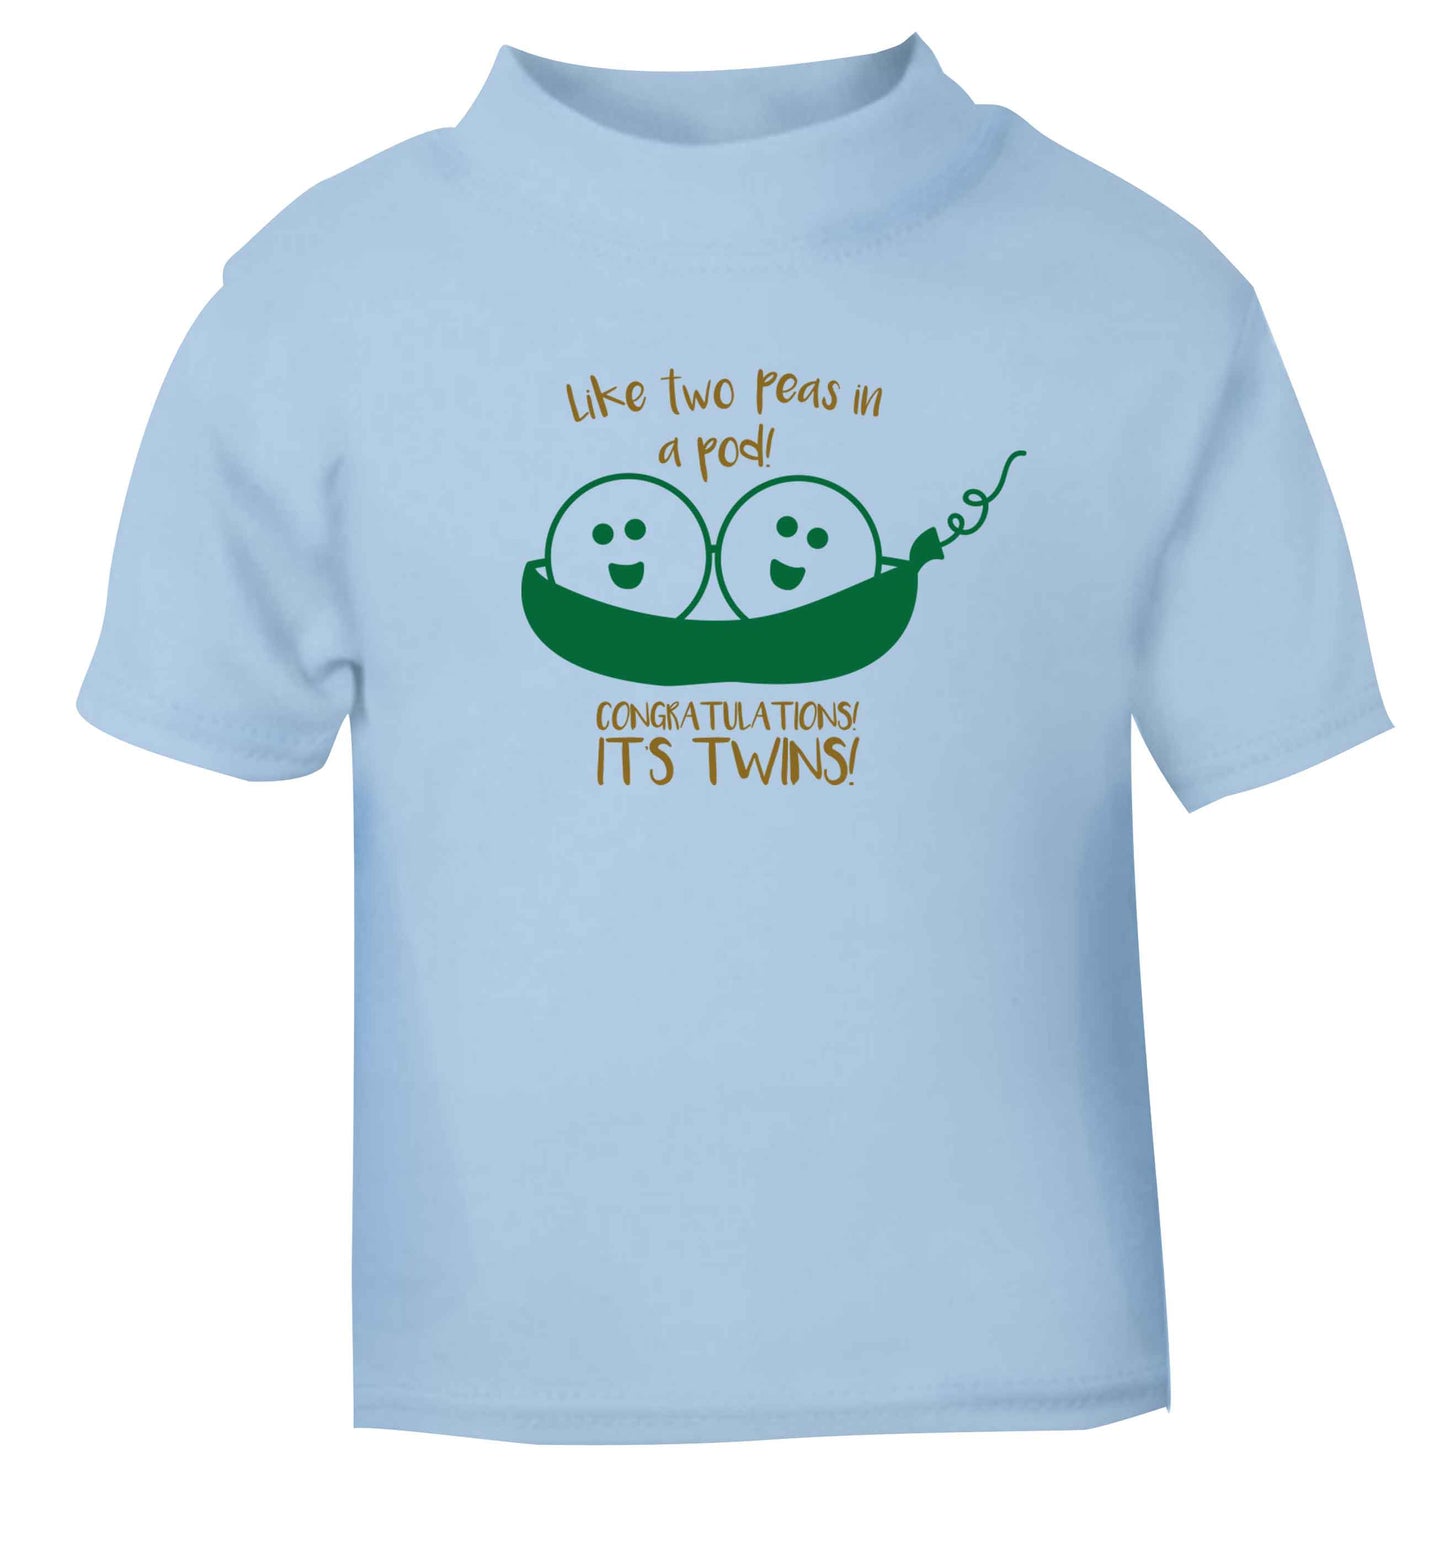 Like two peas in a pod! Congratulations it's twins! light blue baby toddler Tshirt 2 Years